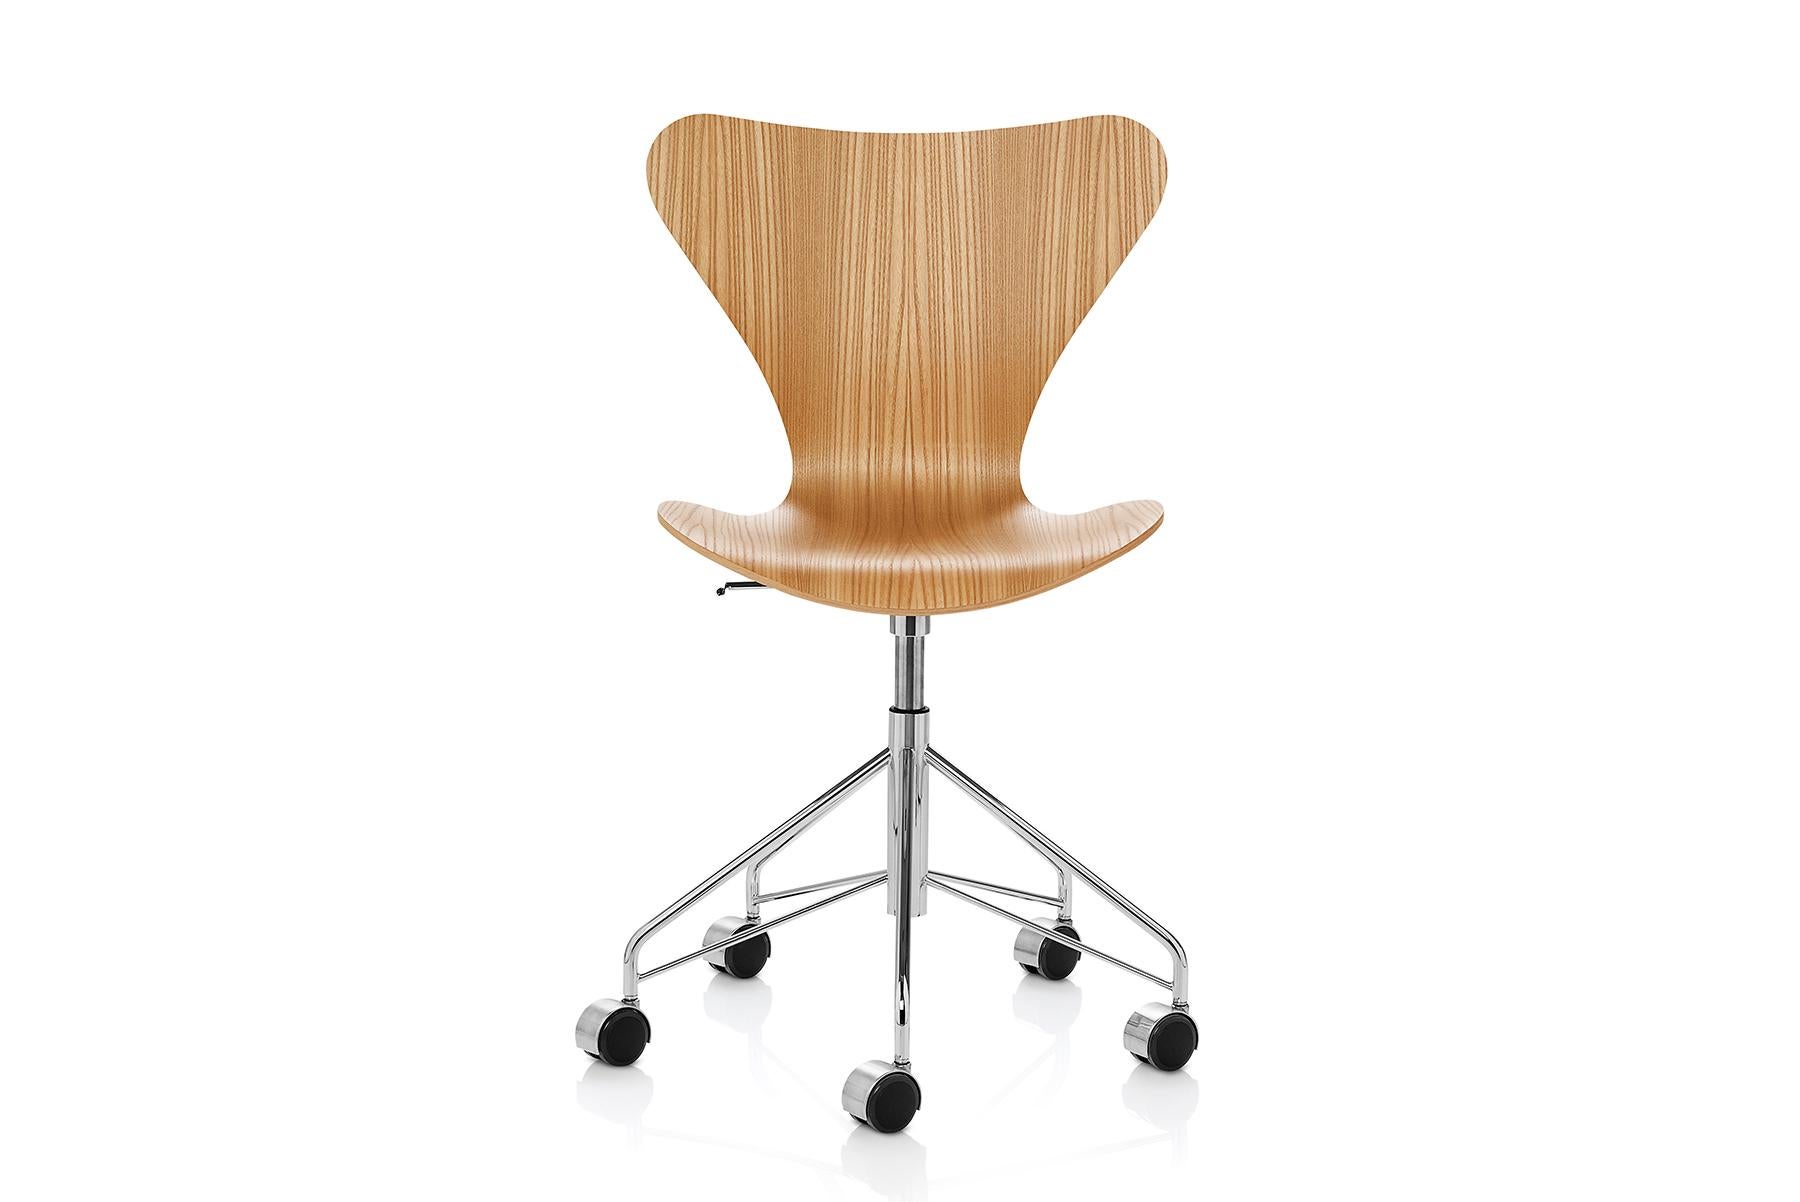 Experience Arne Jacobsen’s classic Series 7 chair with a swivel base and a shell in clear lacquer. The four-legged stackable chair represents the culmination of the lamination technique. The visionary Arne Jacobsen exploited the possibilities of